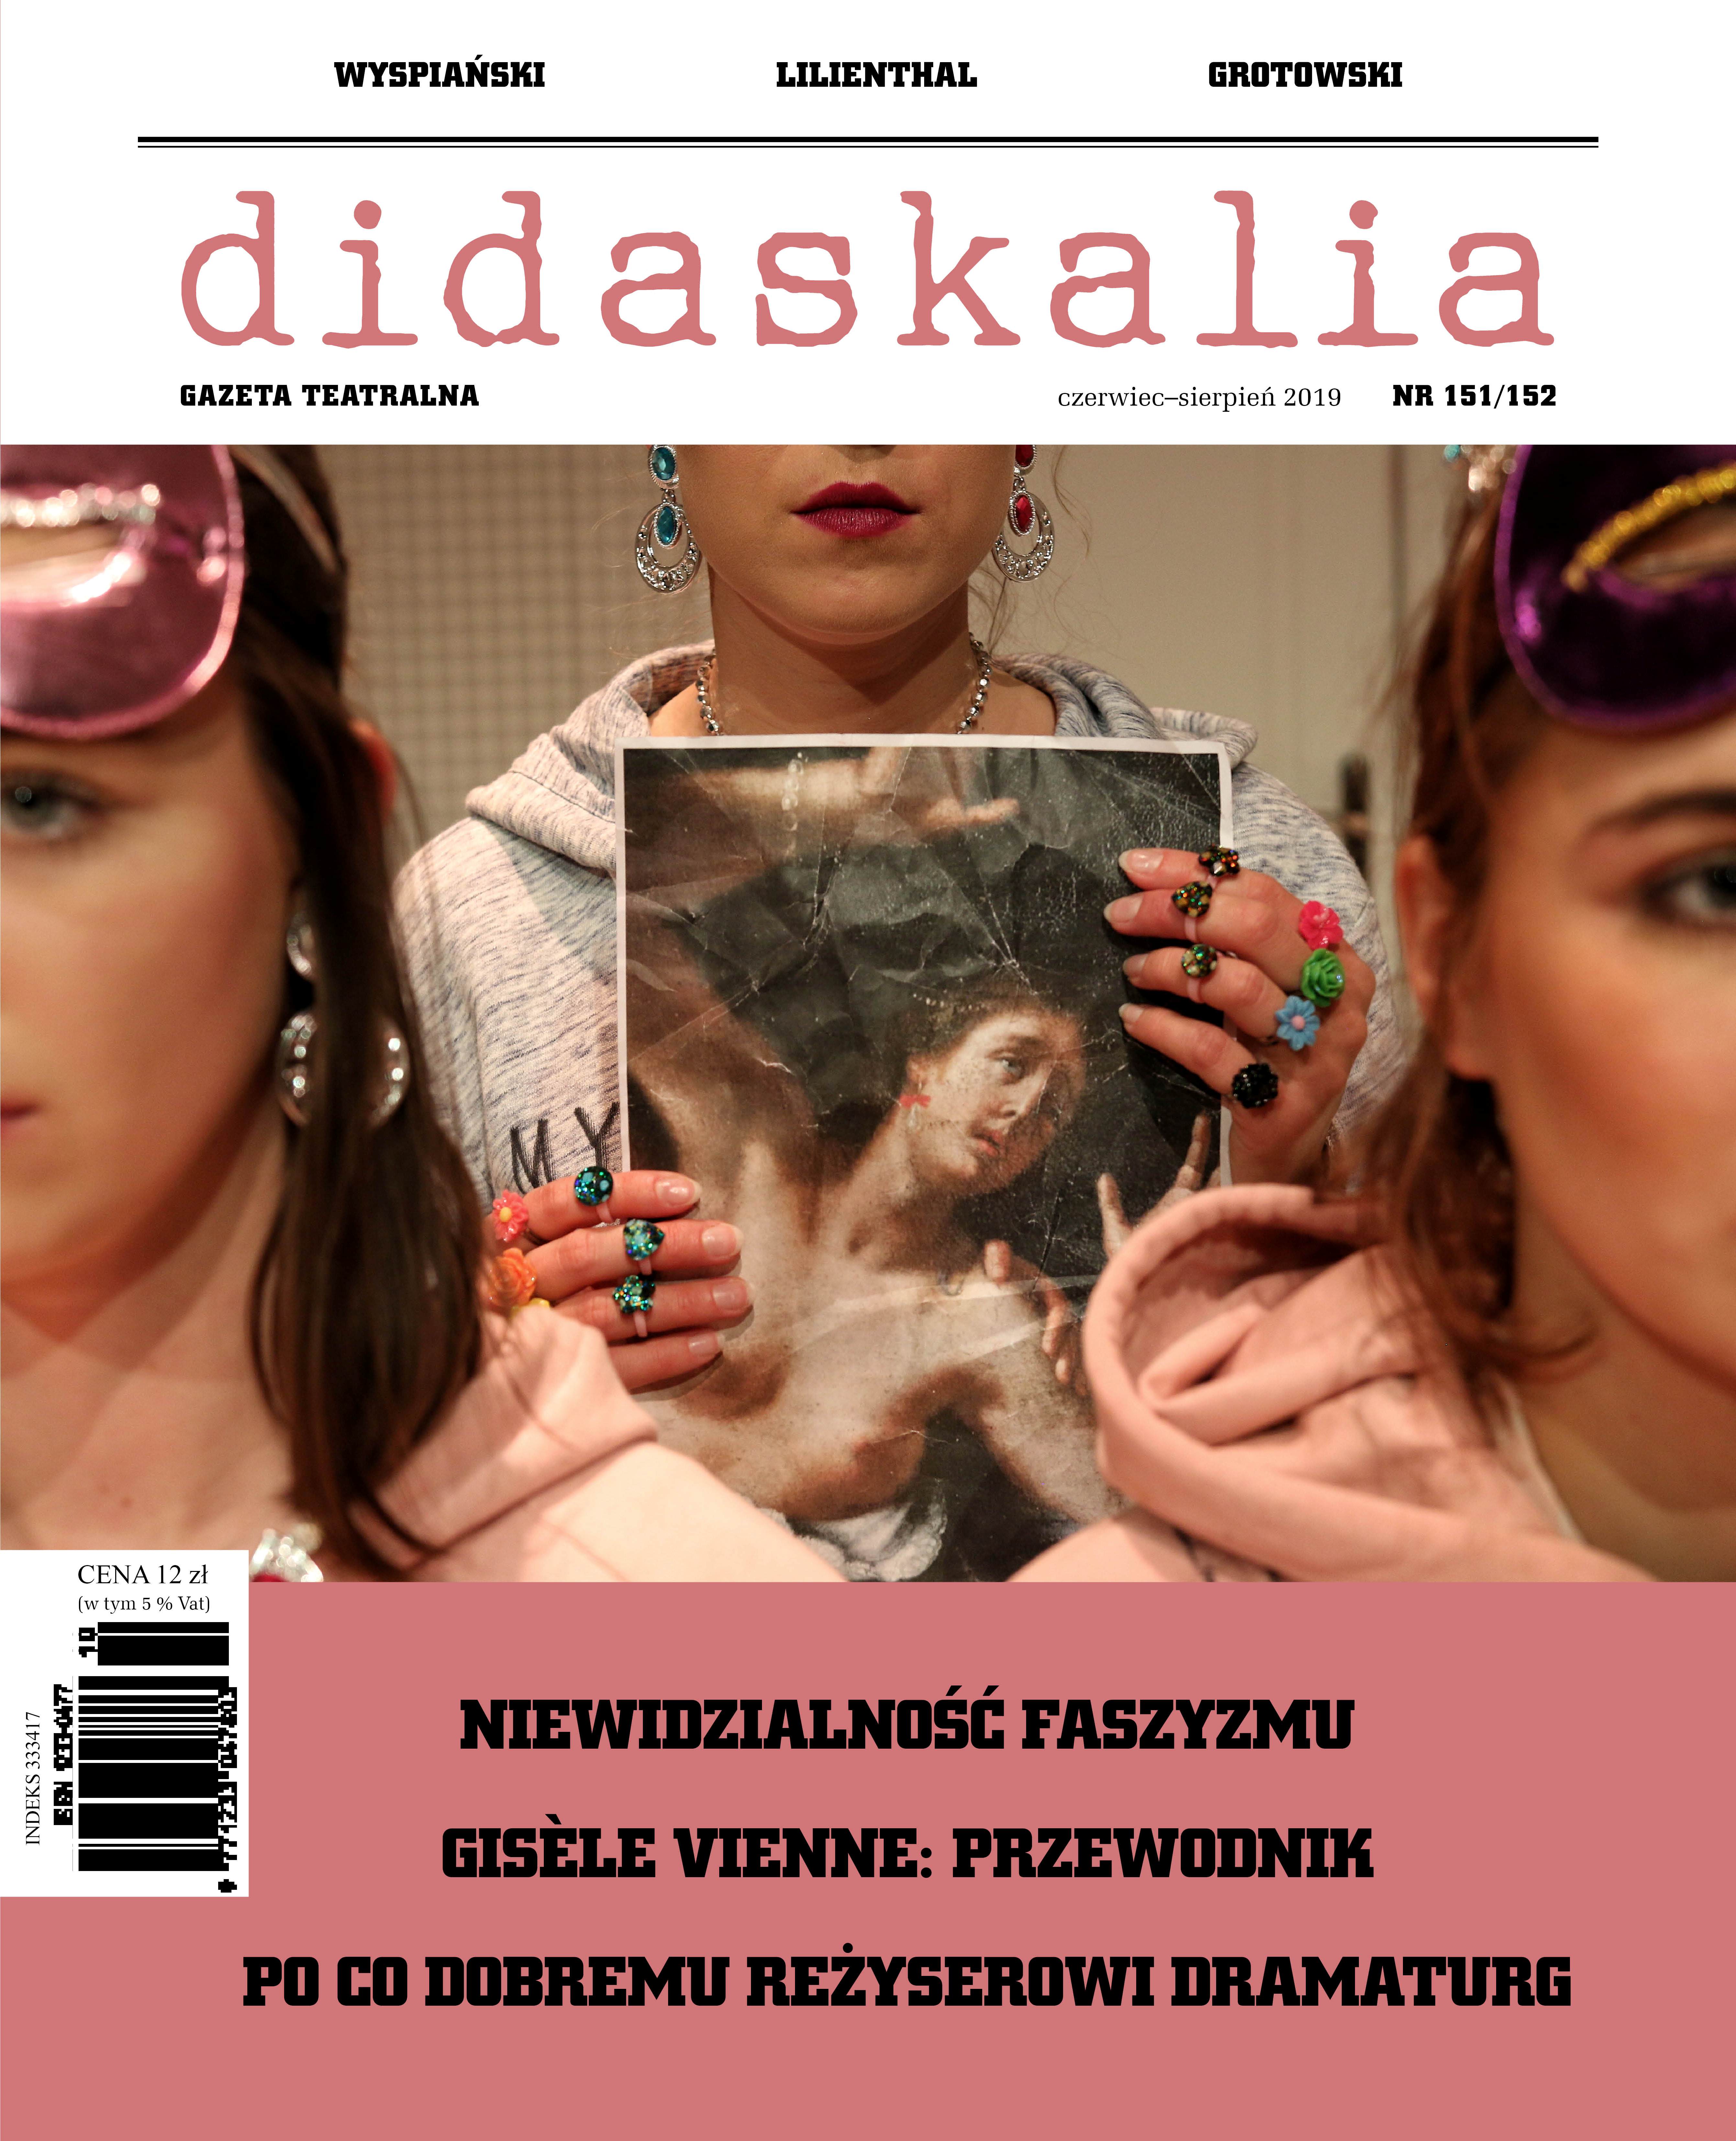 Stasia Wyspiański play in the theater Cover Image